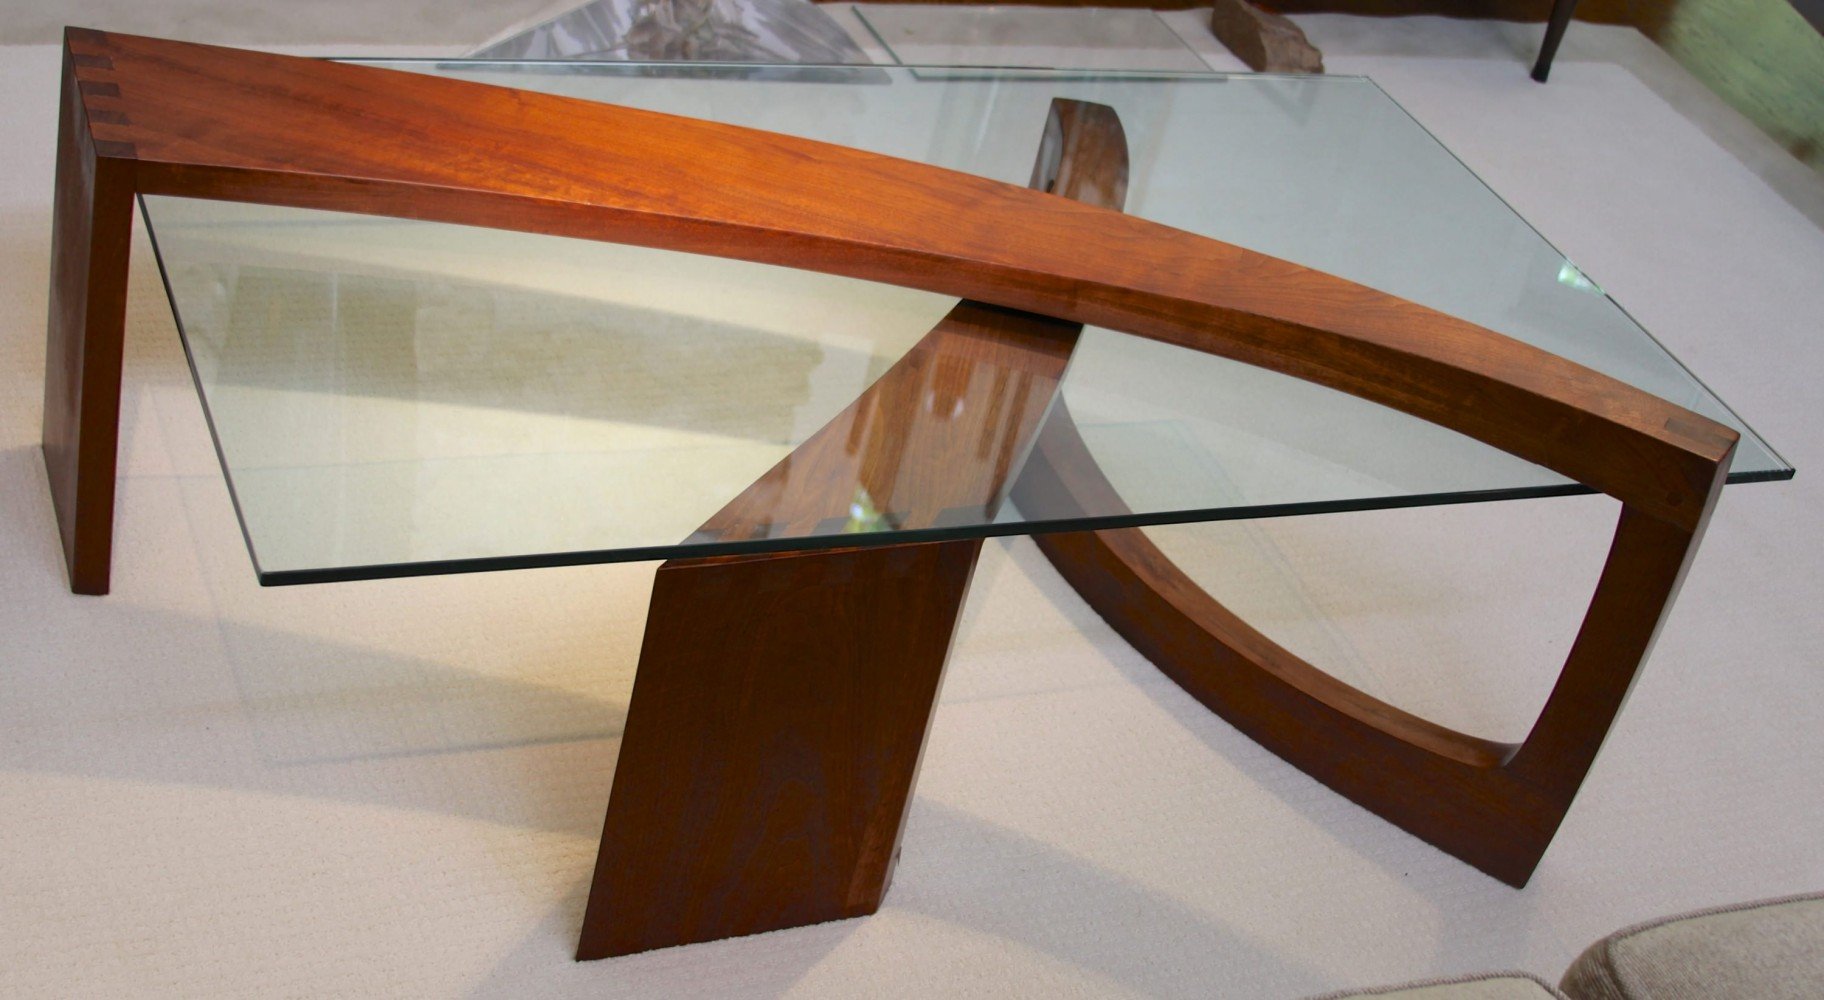 Walnut and Glass Coffee Table by Ben Mack